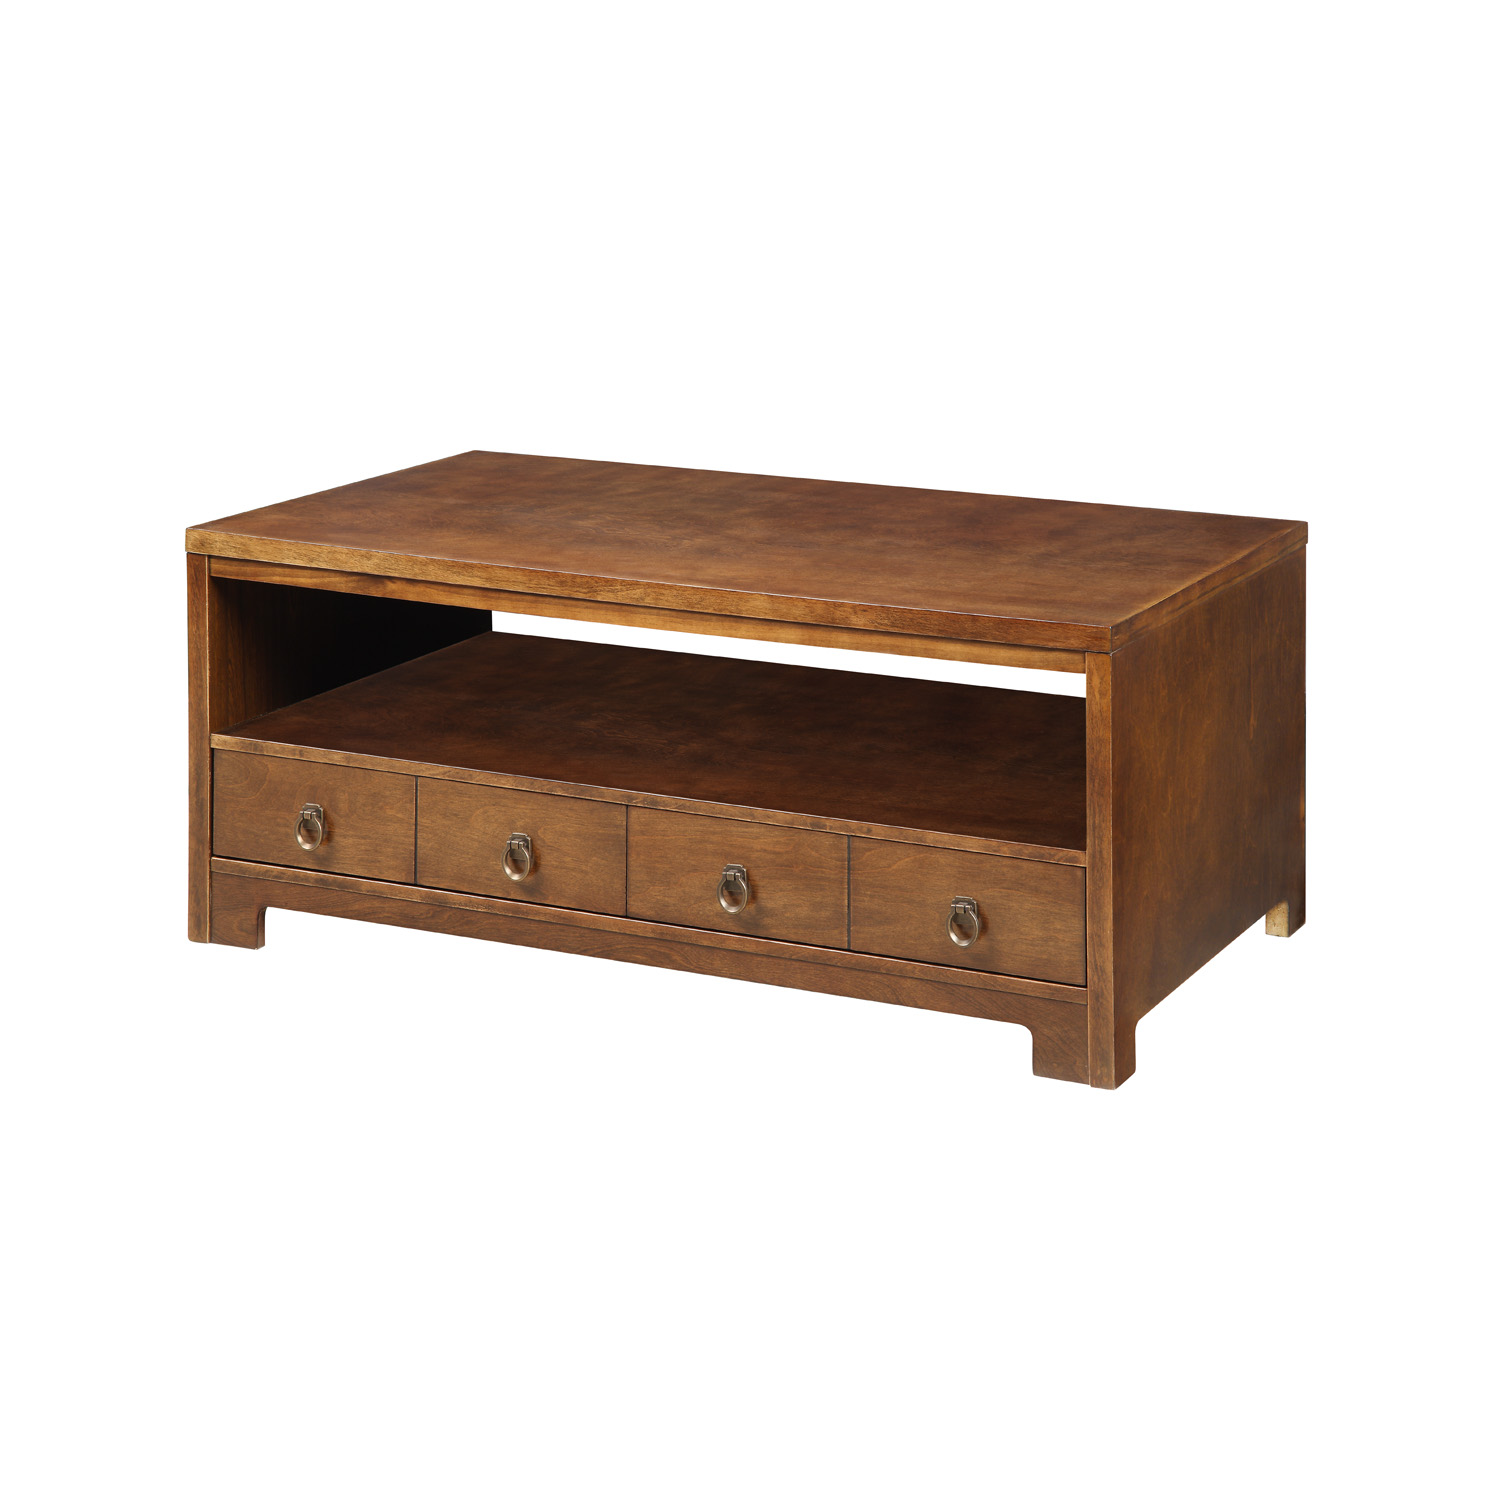 2-Drawer Coffee Table in Warm Mahogany